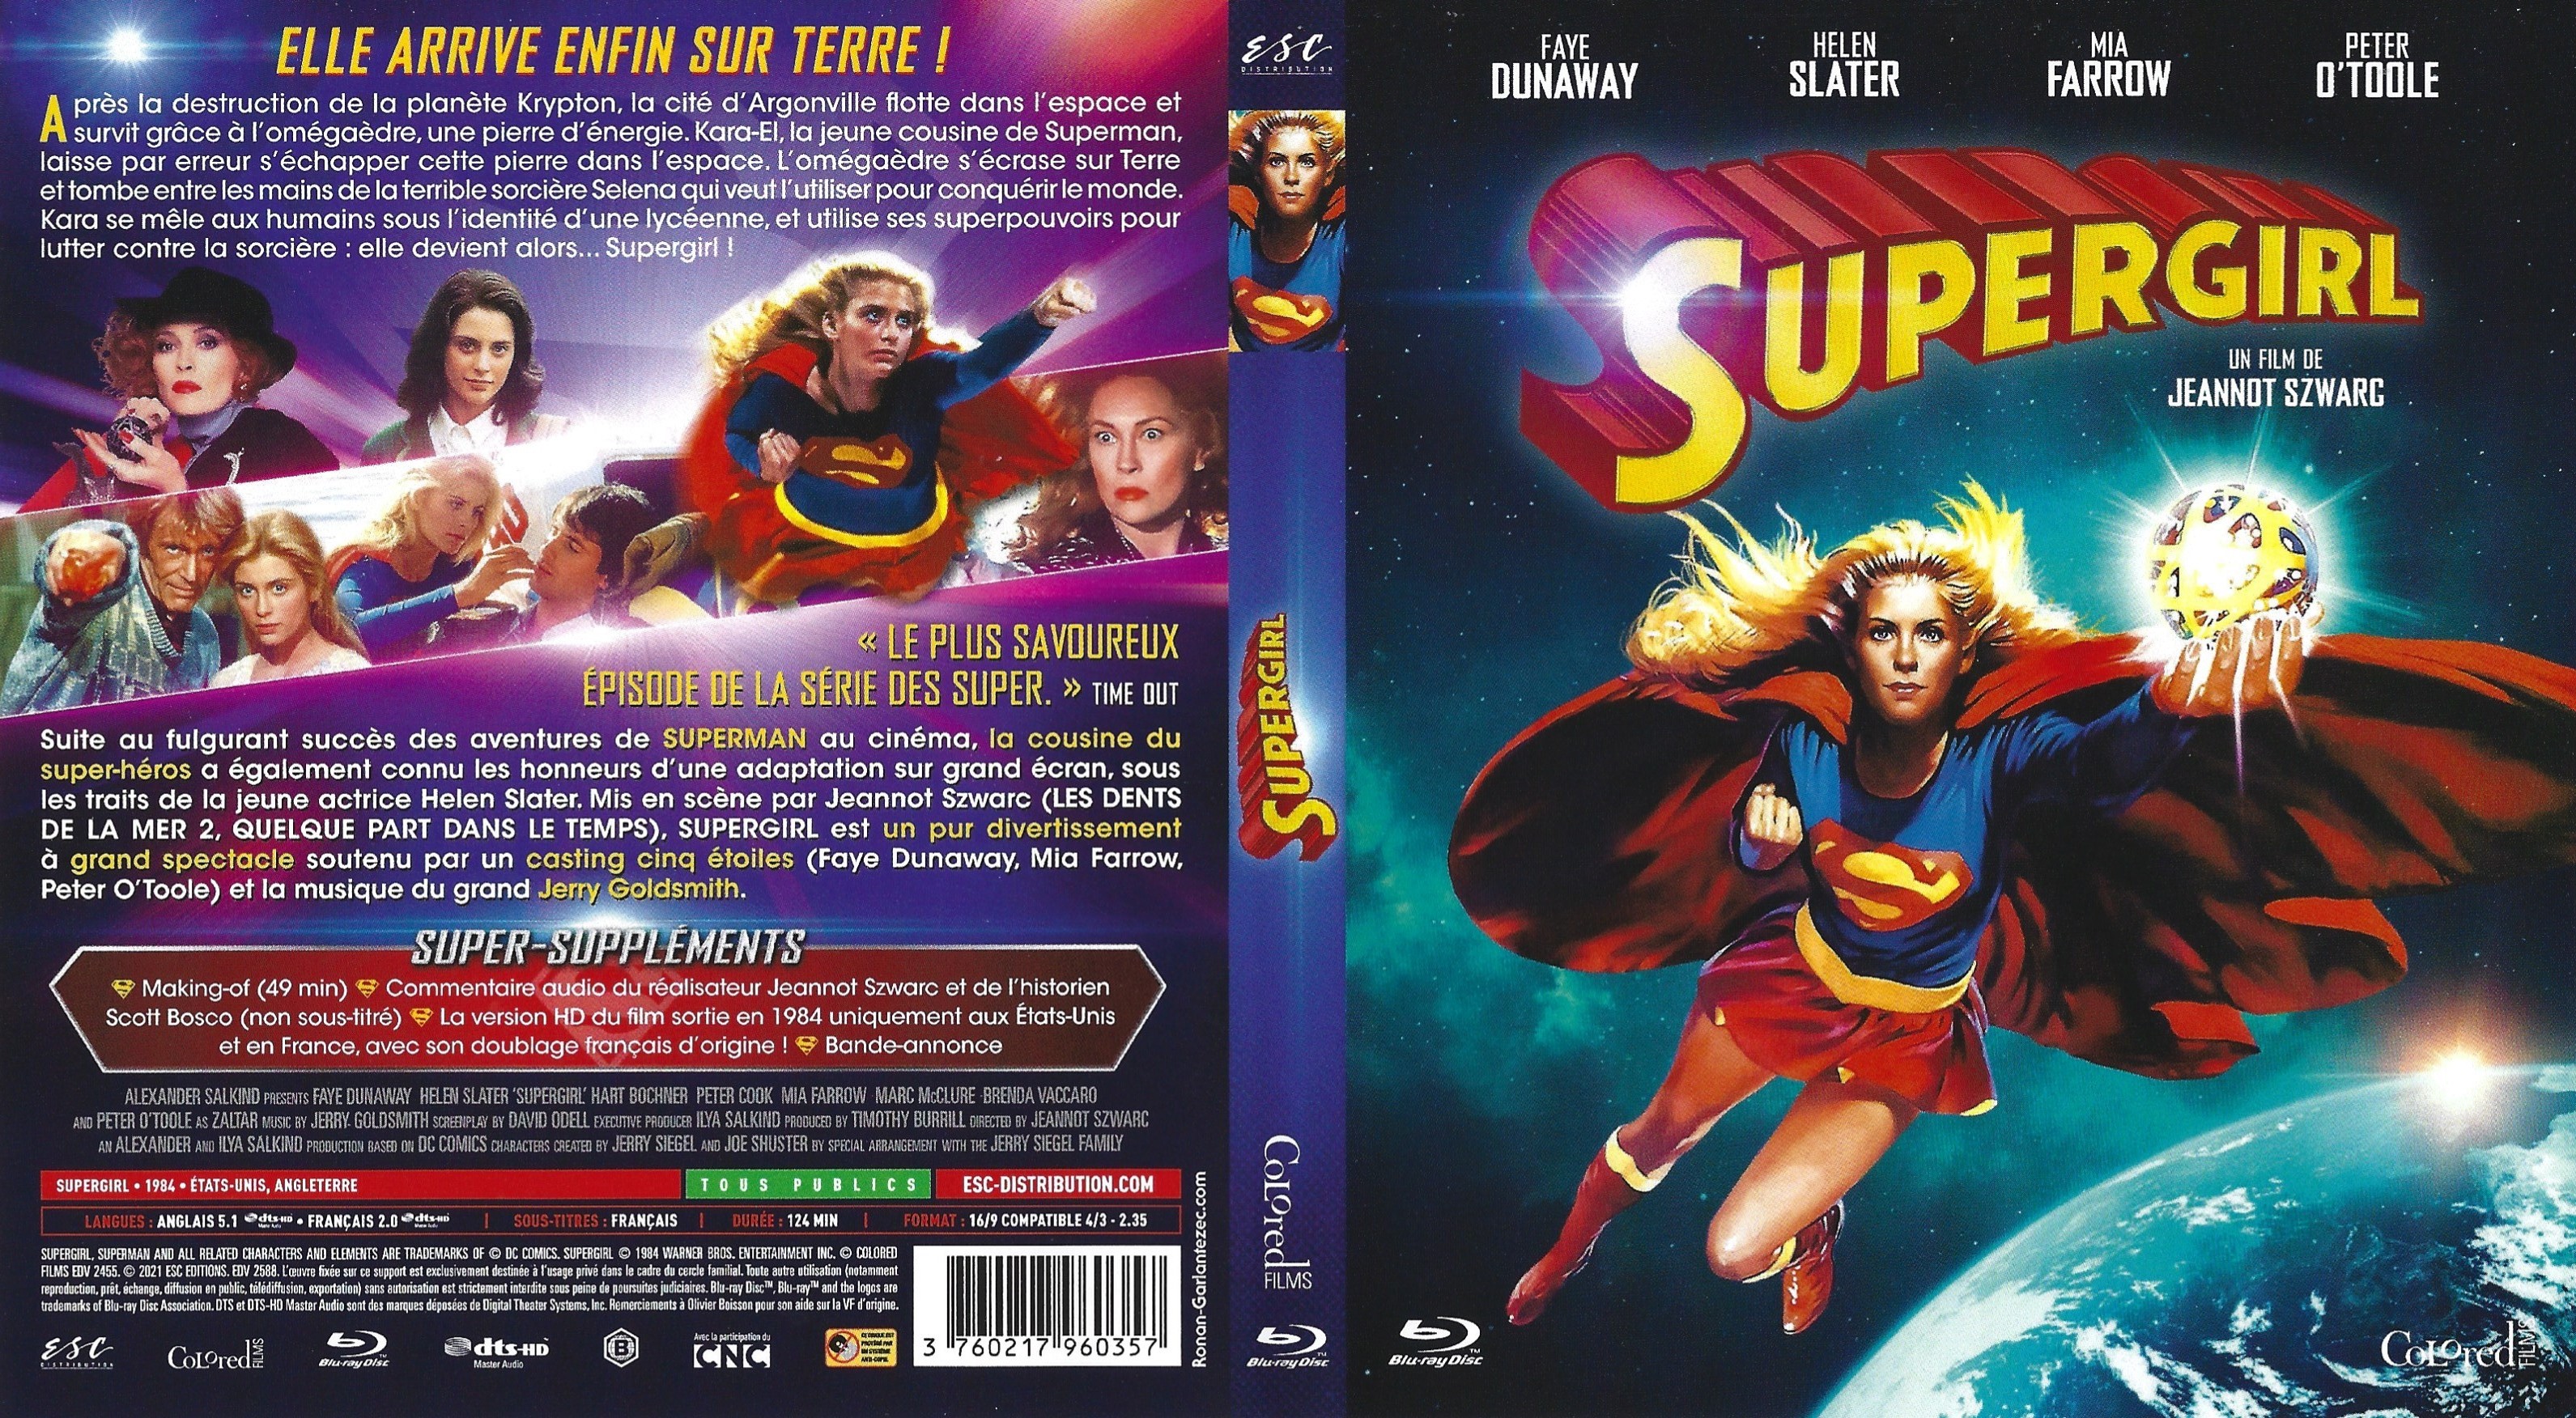 Jaquette DVD Supergirl (BLU-RAY)